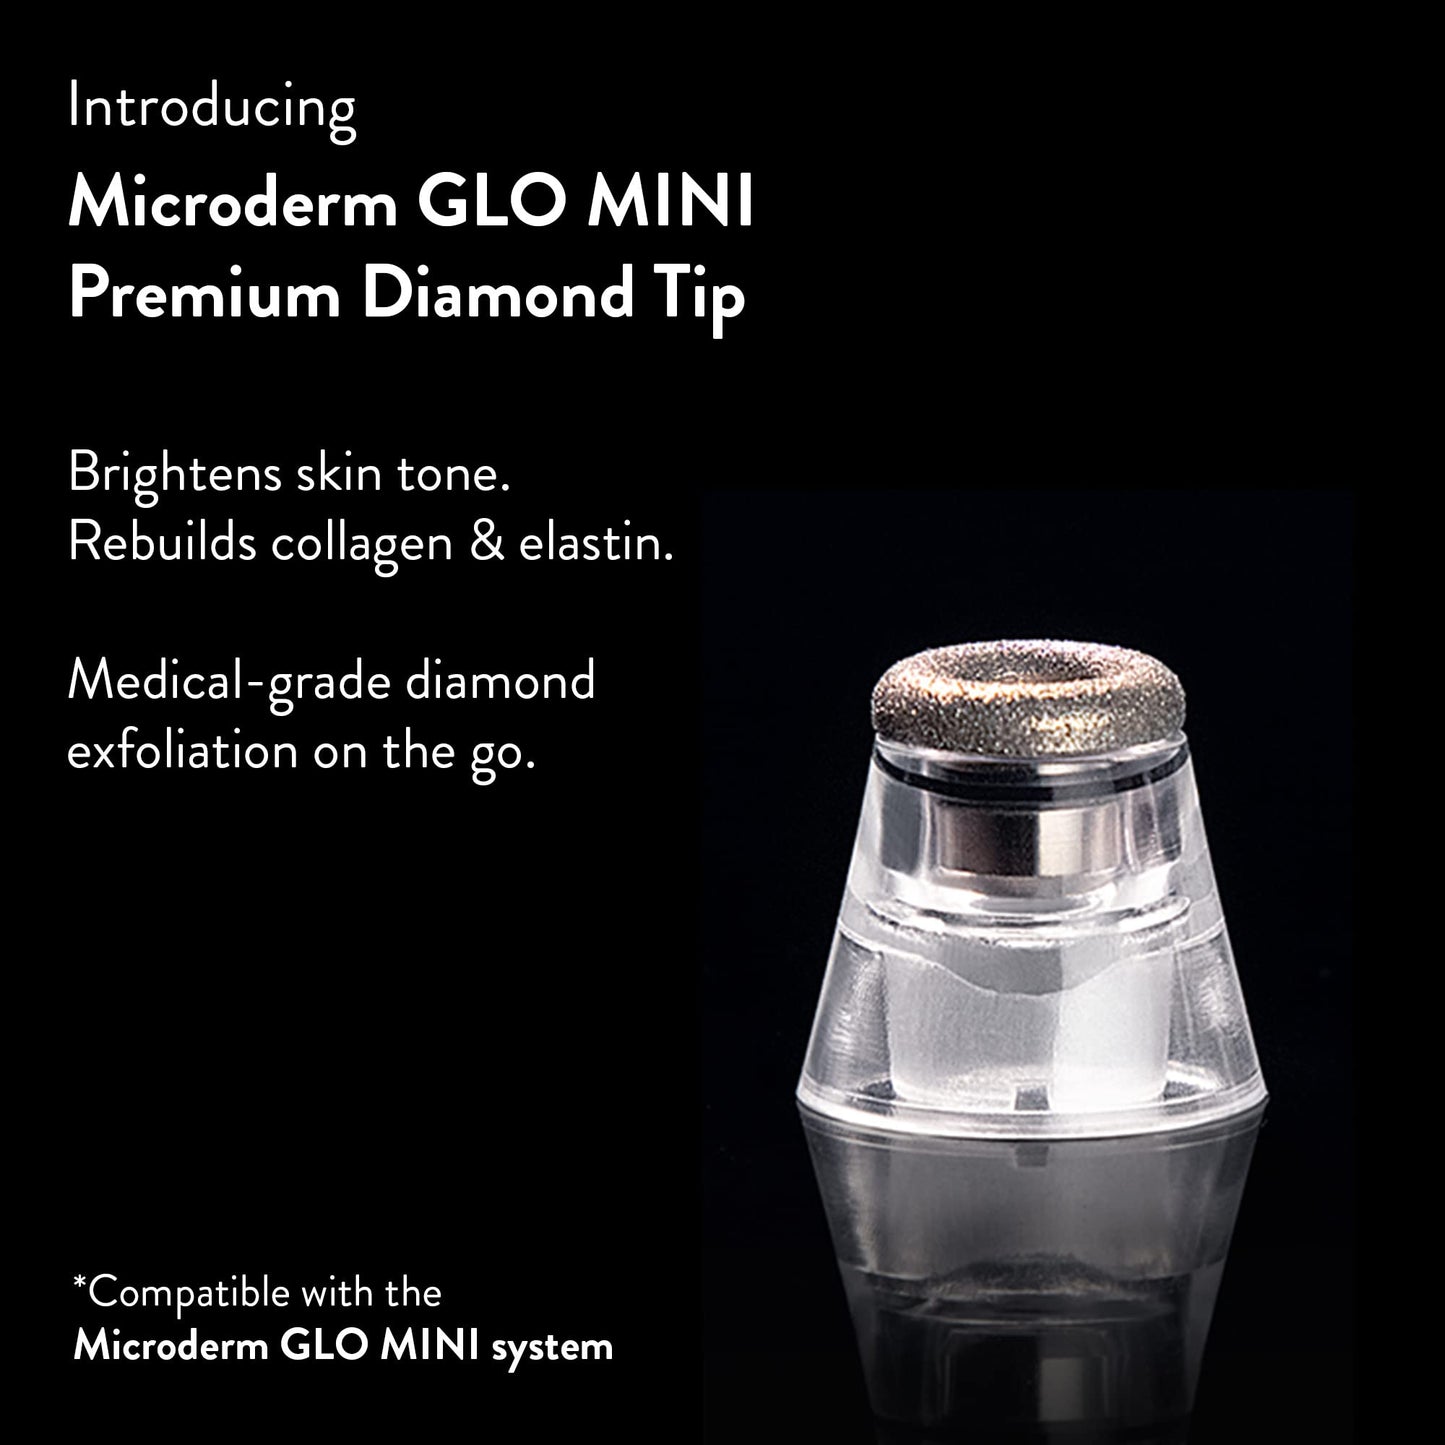 Microderm GLO MINI Premium Diamond Microdermabrasion Tips by Microderm GLO - Medical Grade Stainless Steel Accessories, Patented Safe3D Technology, Safe for All Skin Types. (Premium)